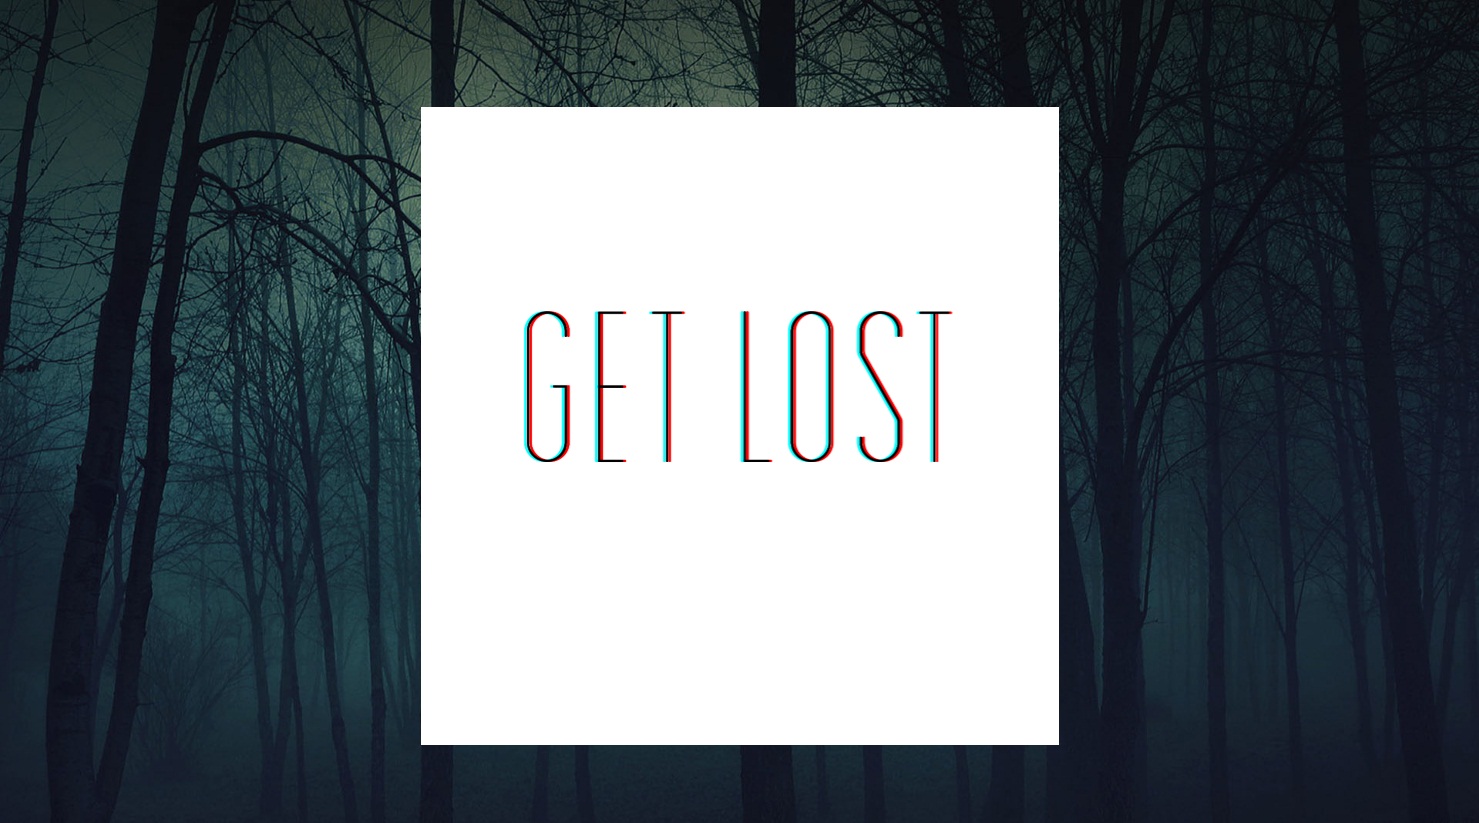 Don t get got game. Get Lost. Don't get Lost игра. Get Lost picture. Get Lost meaning.